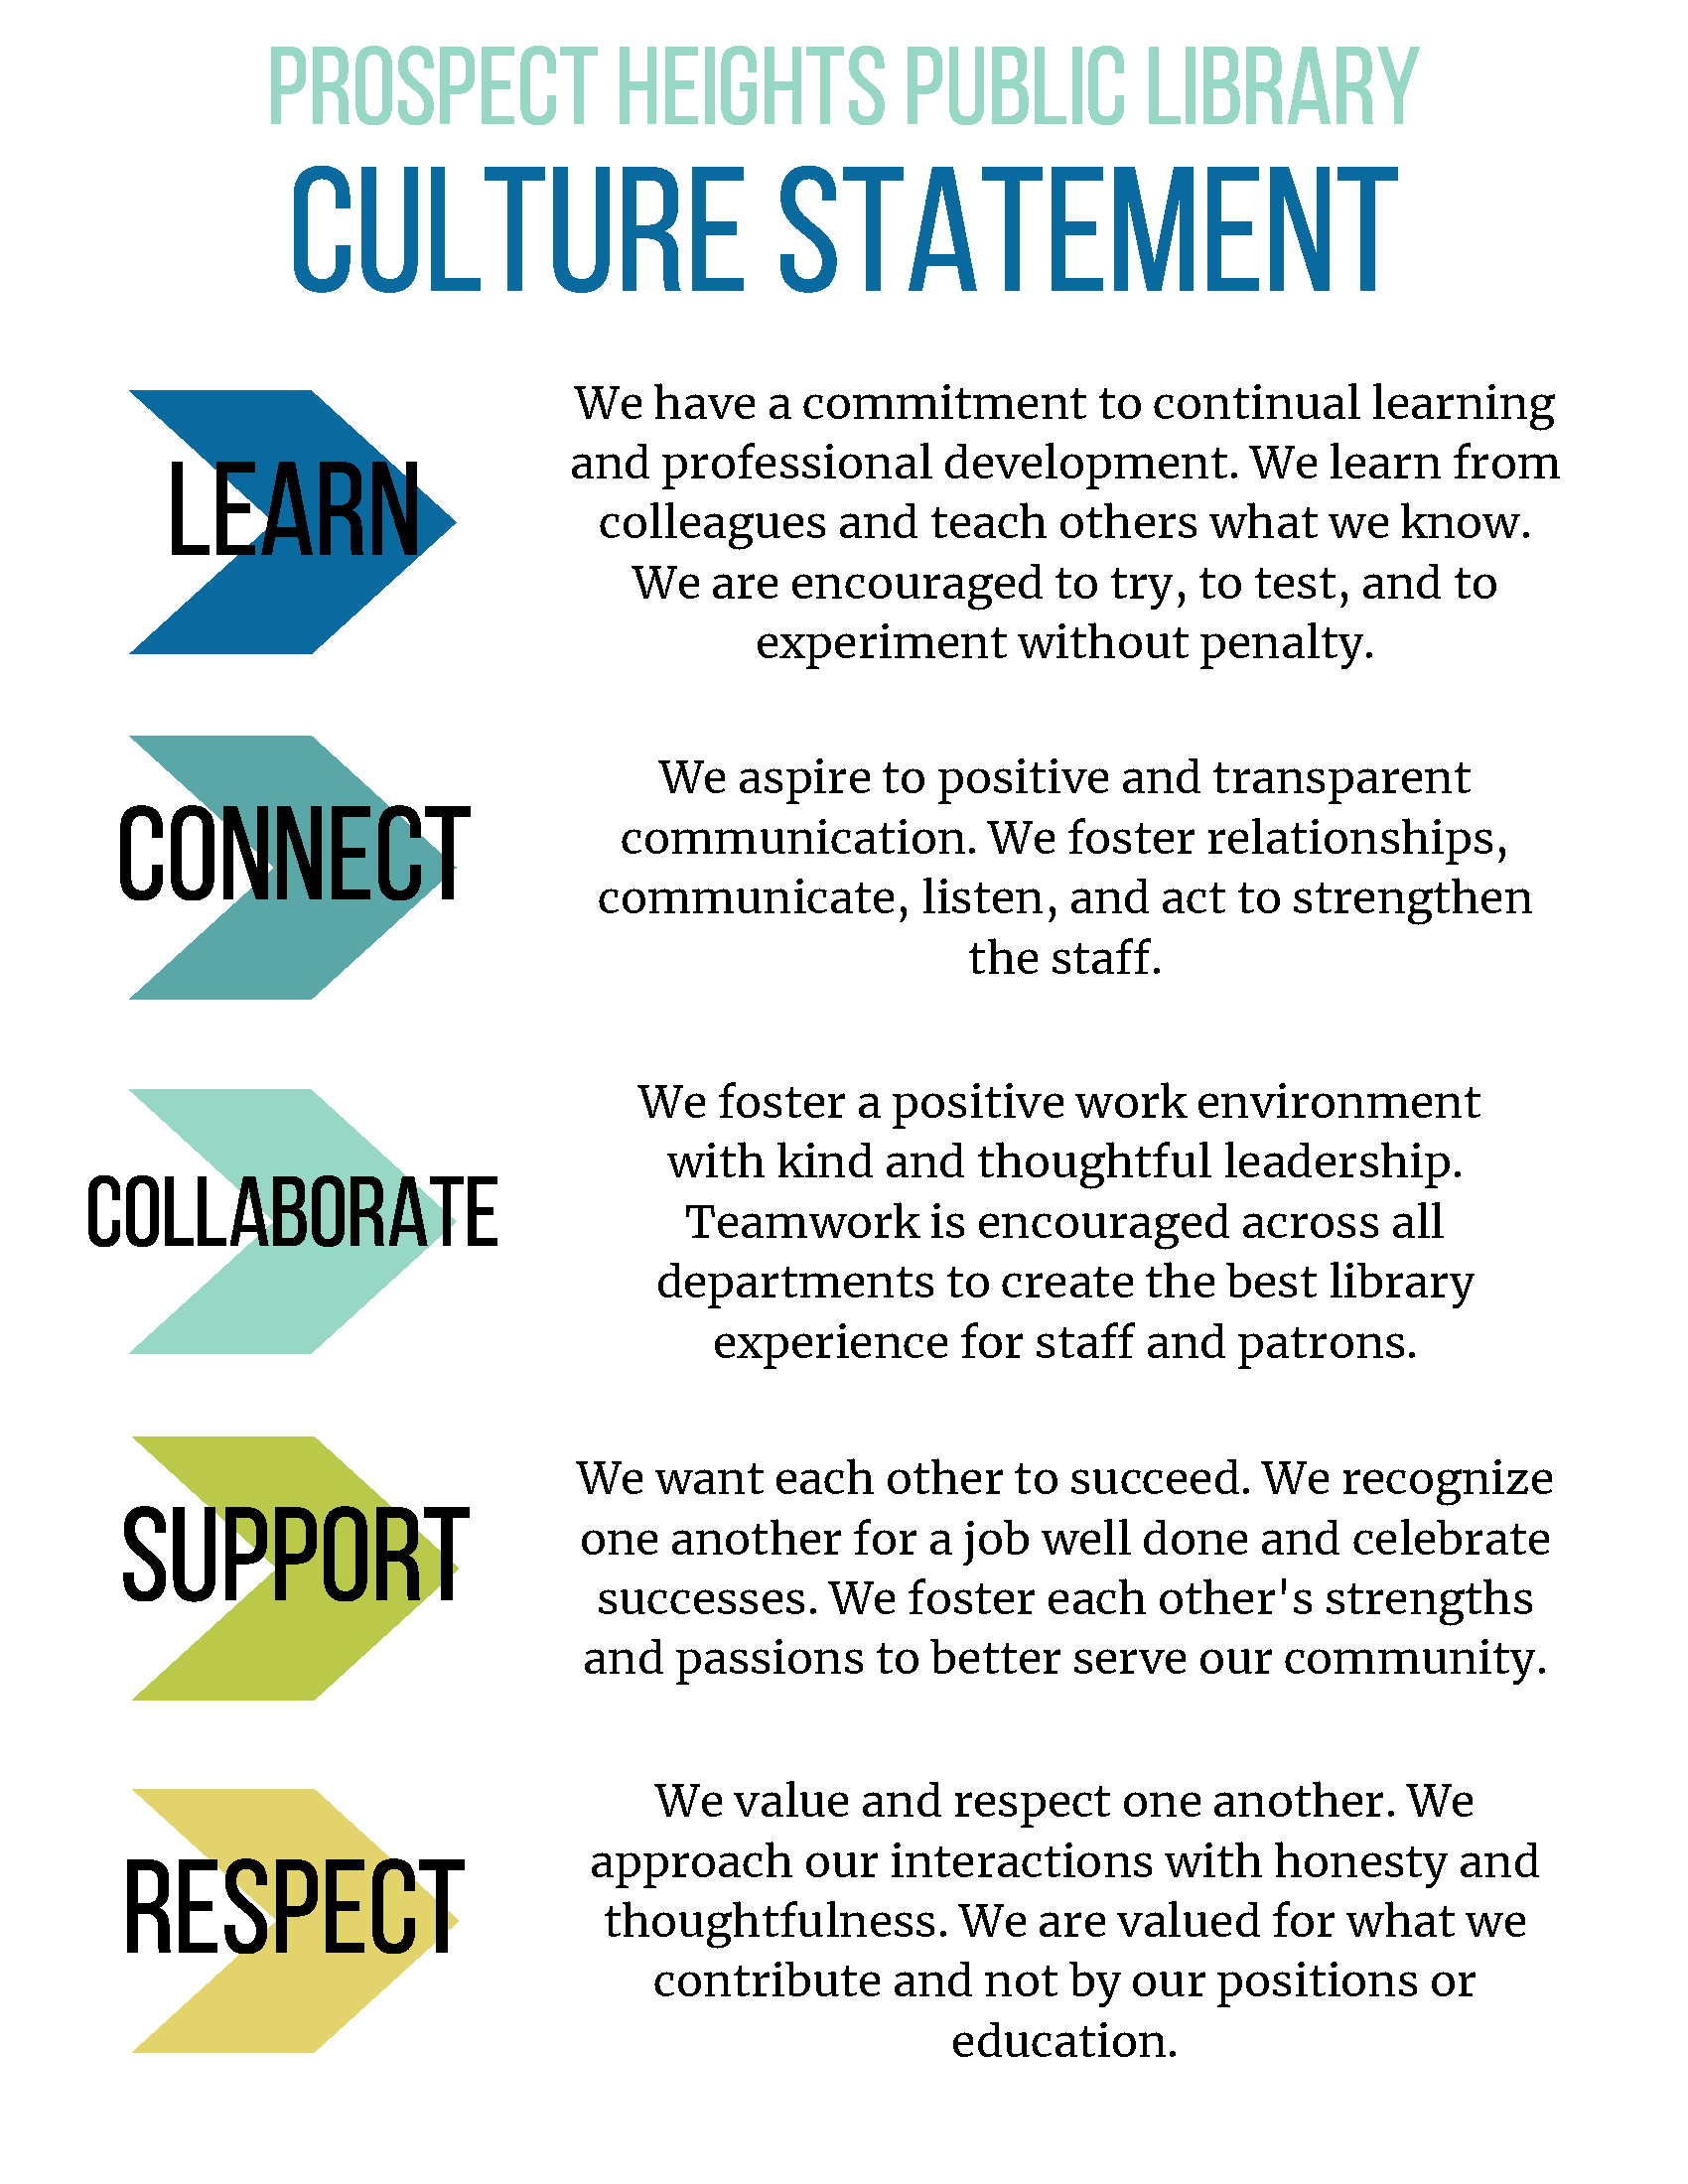 Culture statement: Learn, Connect, Collaborate, Support, and Respect 